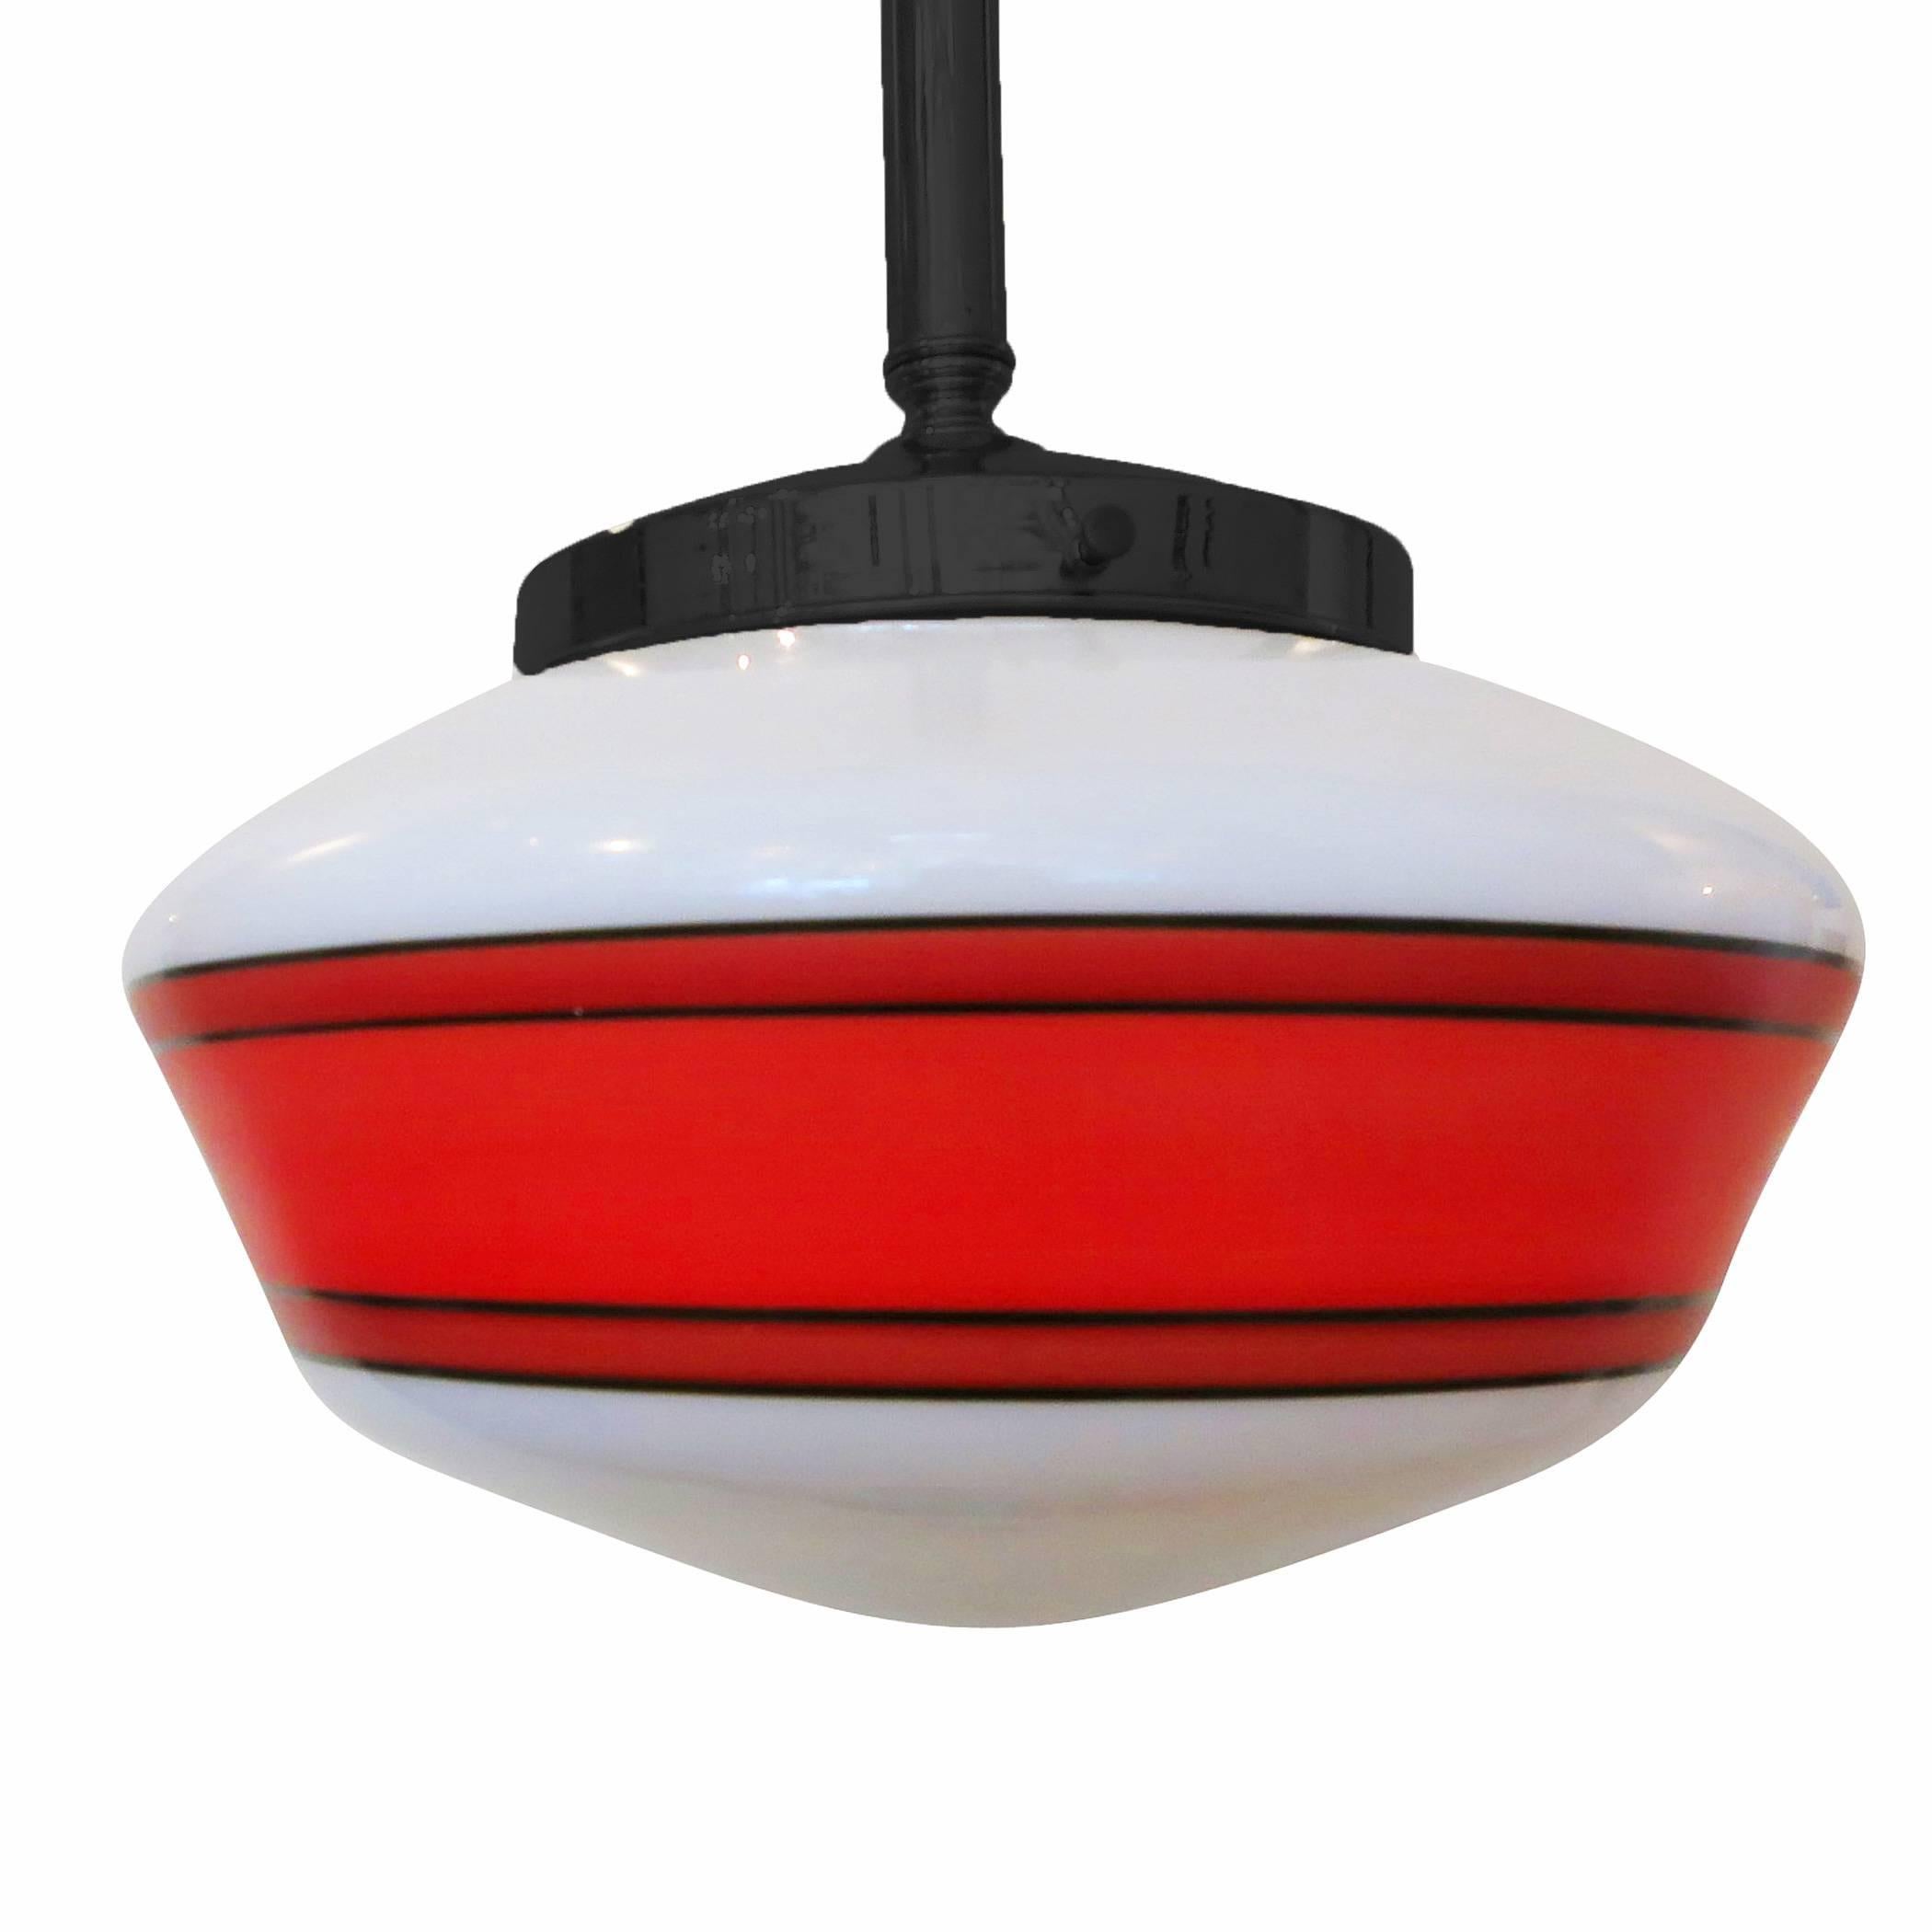 American Hand-Painted Schoolhouse Milk Glass Pendant Light with Hardware